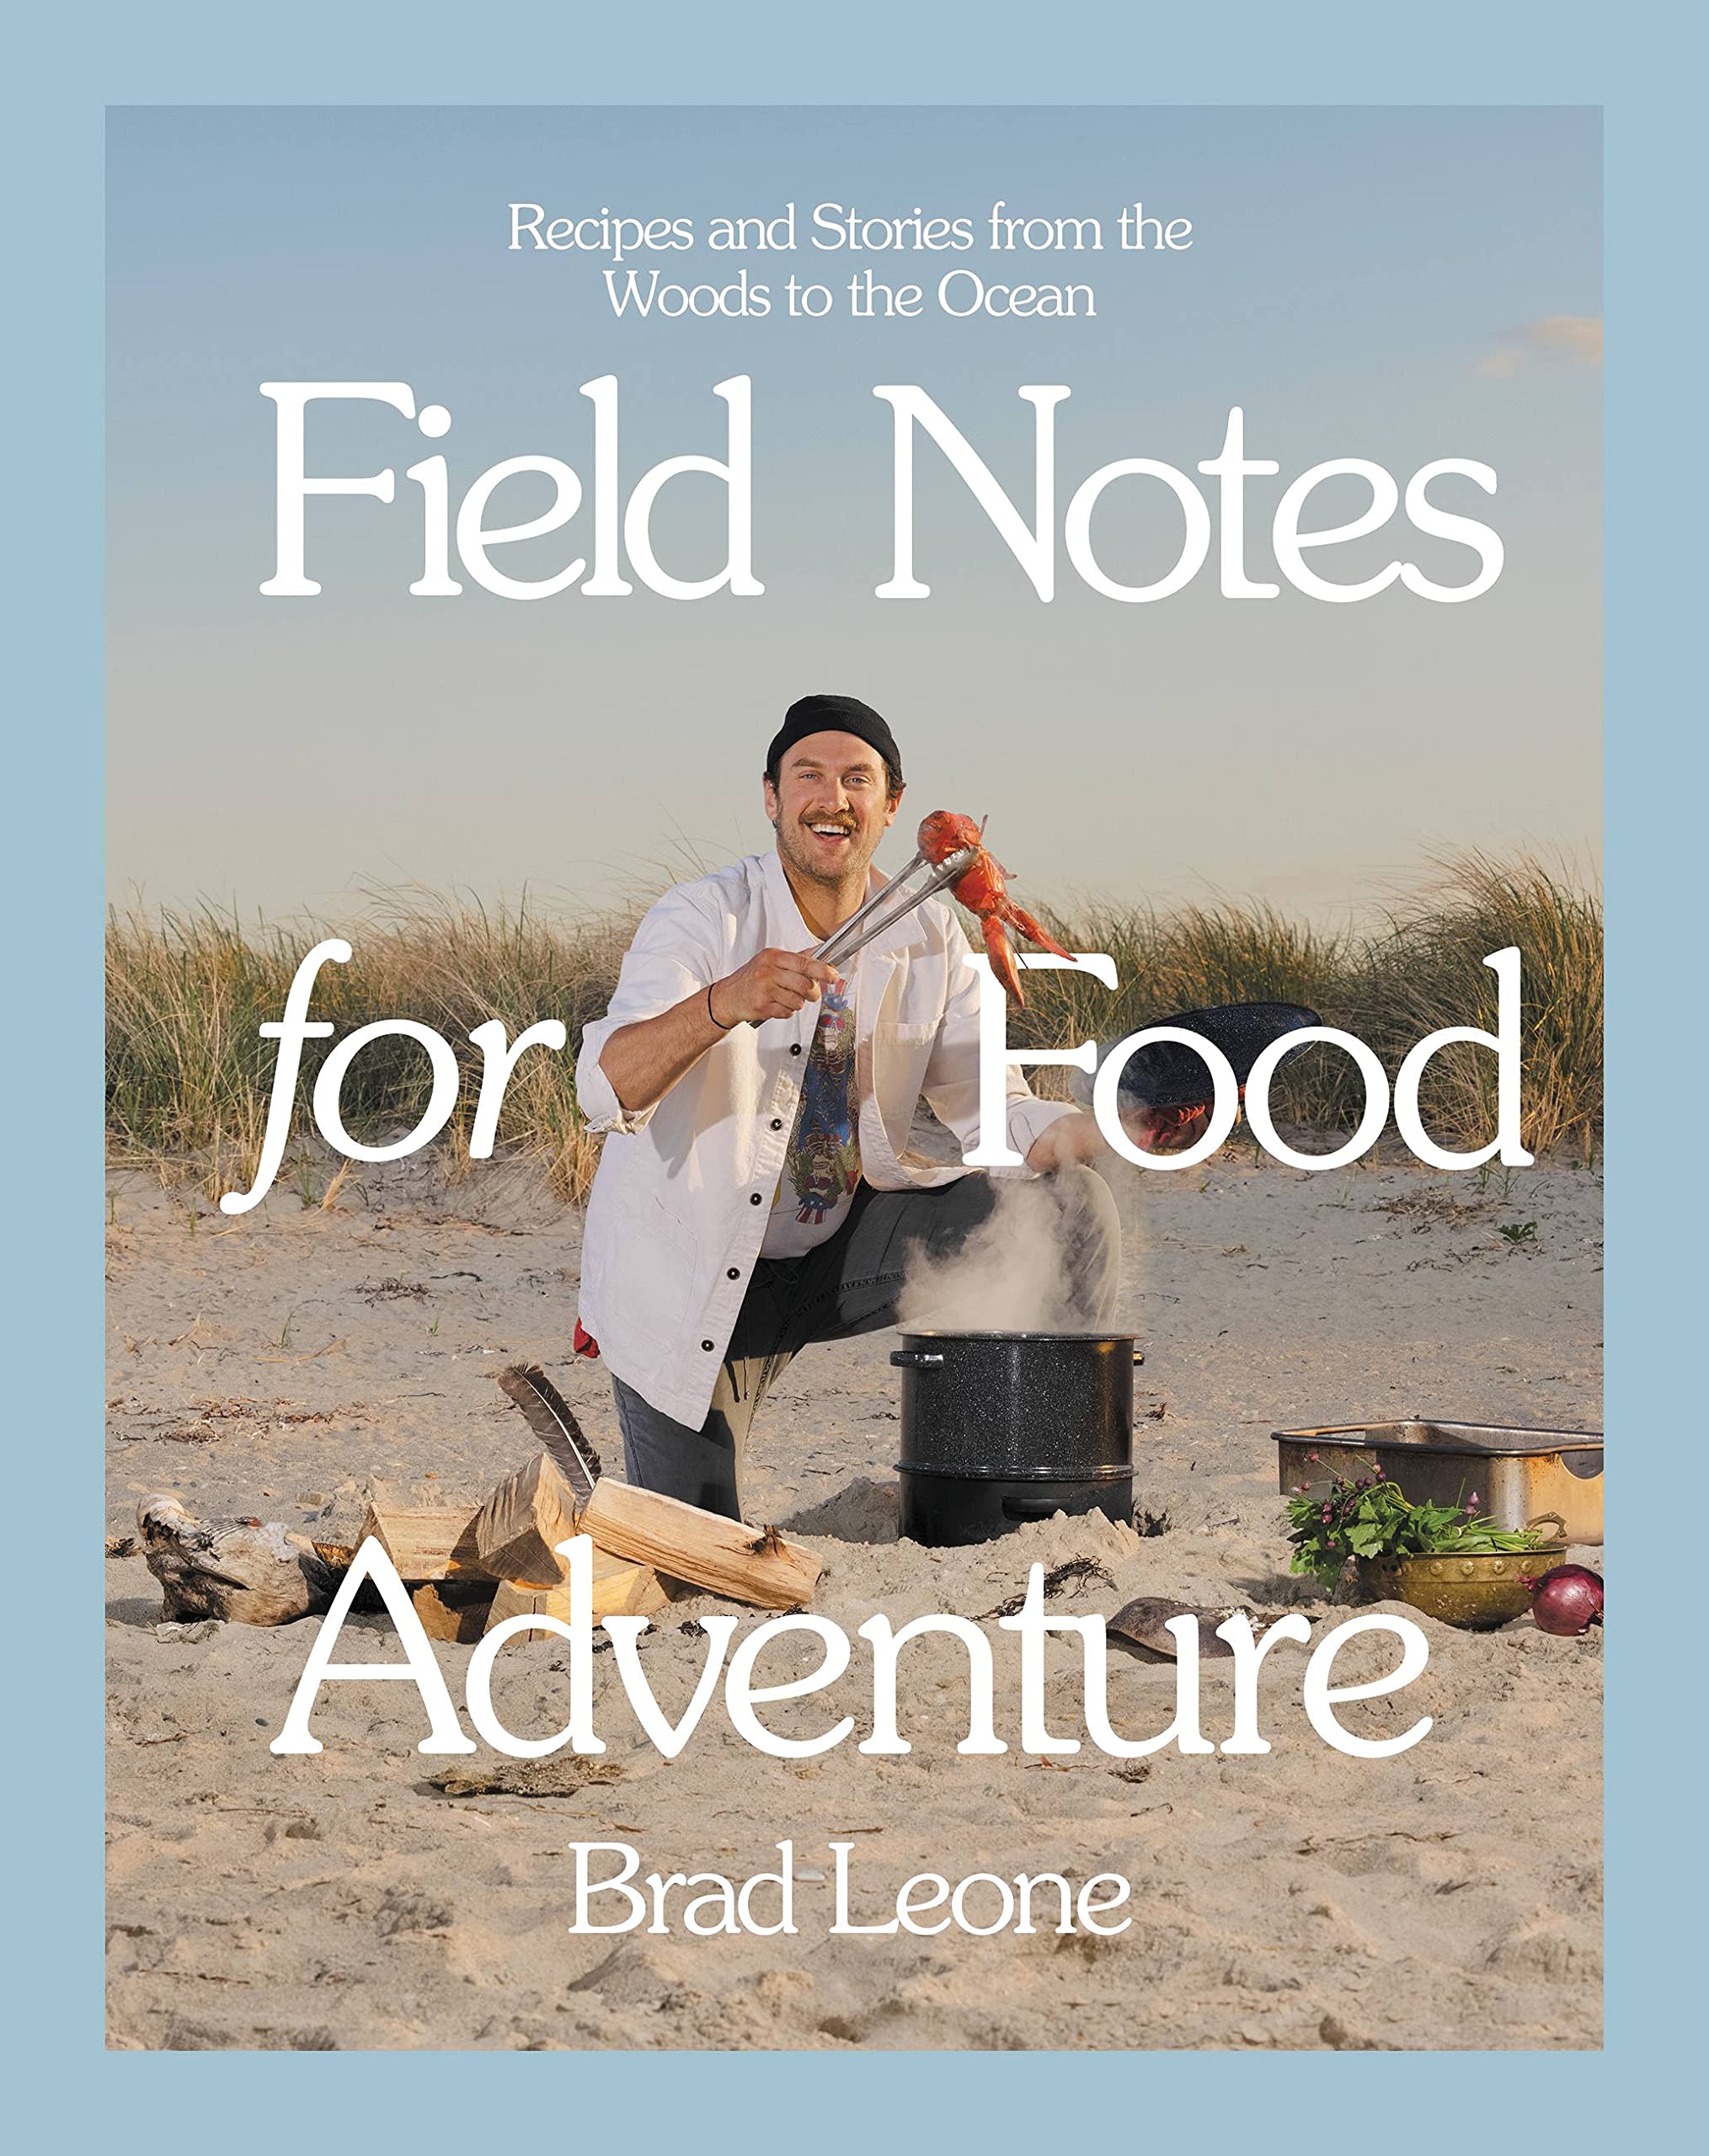 Field Notes for Food Adventure: Recipes and Stories from the Woods to the Ocean (Brad Leone)